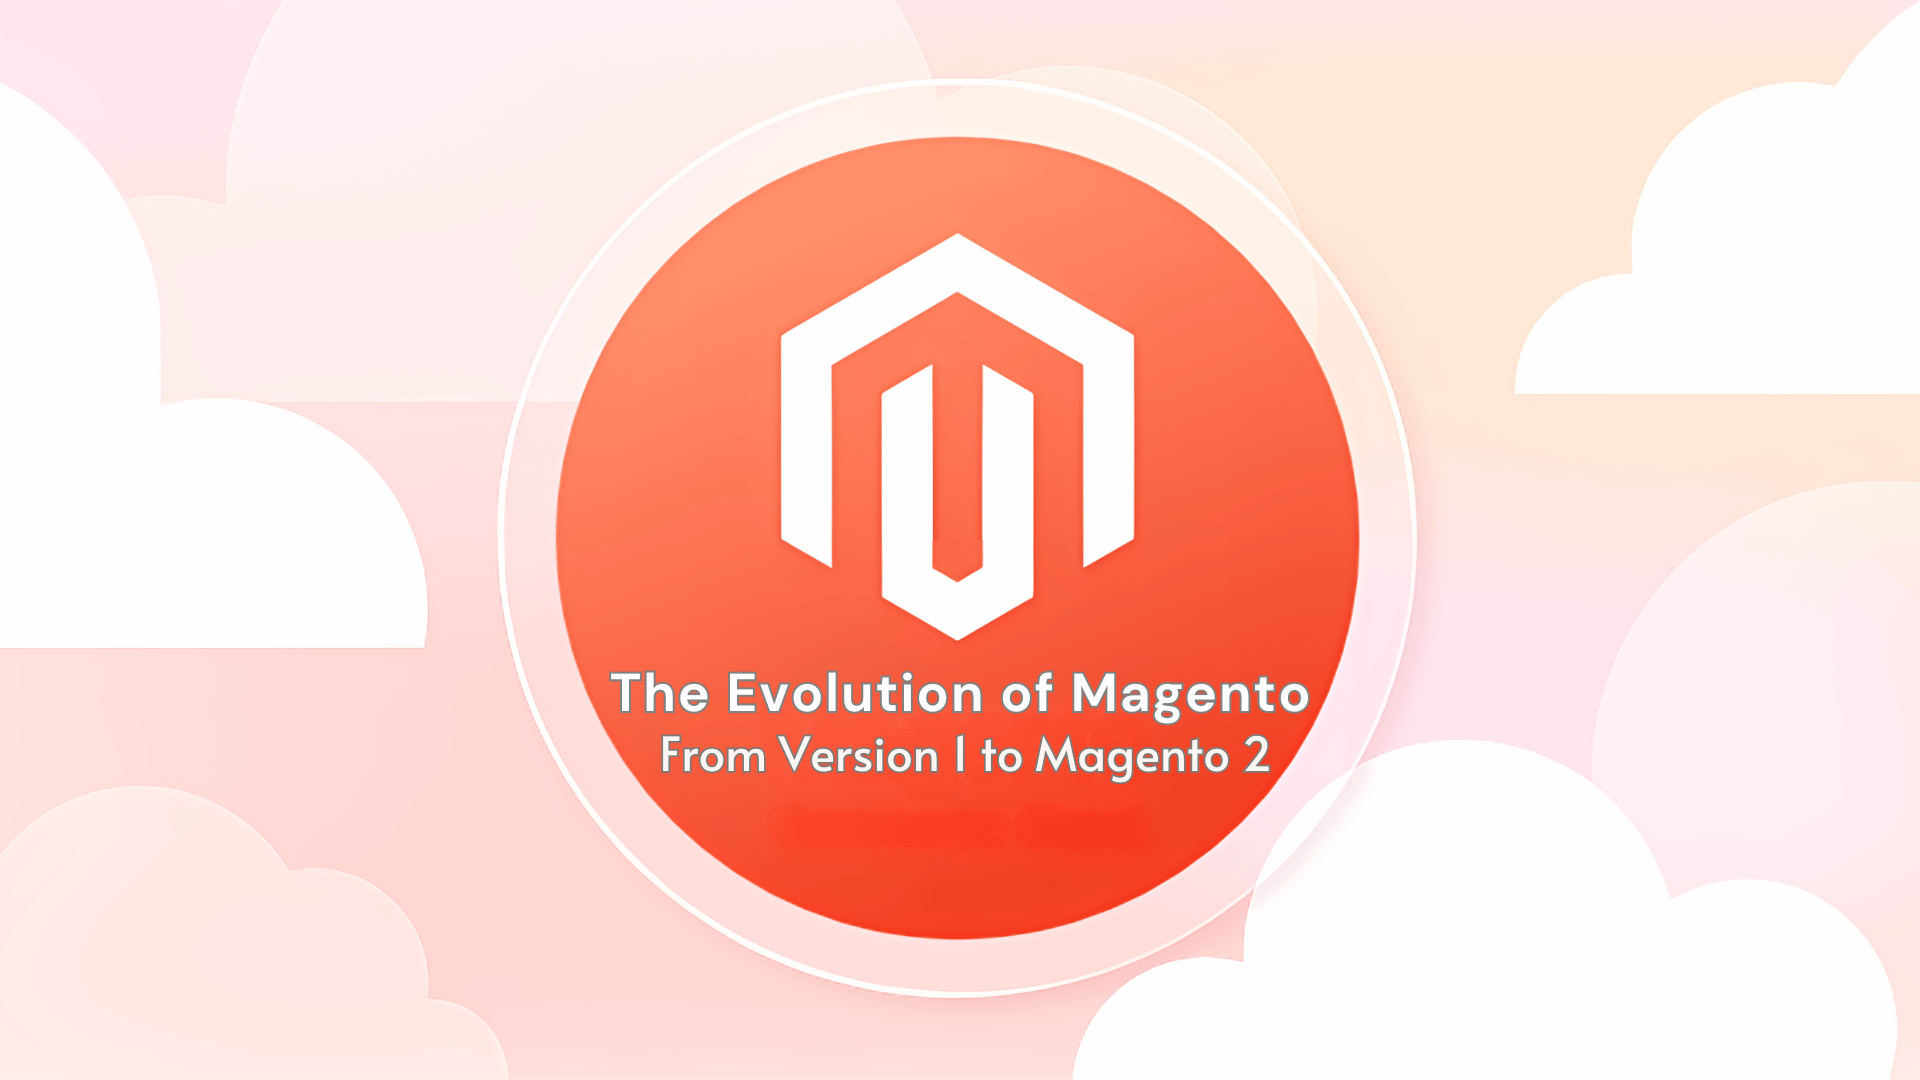 The Evolution of Magento: From Version 1 to Magento 2 | Upgrade to M2 & Key Differences